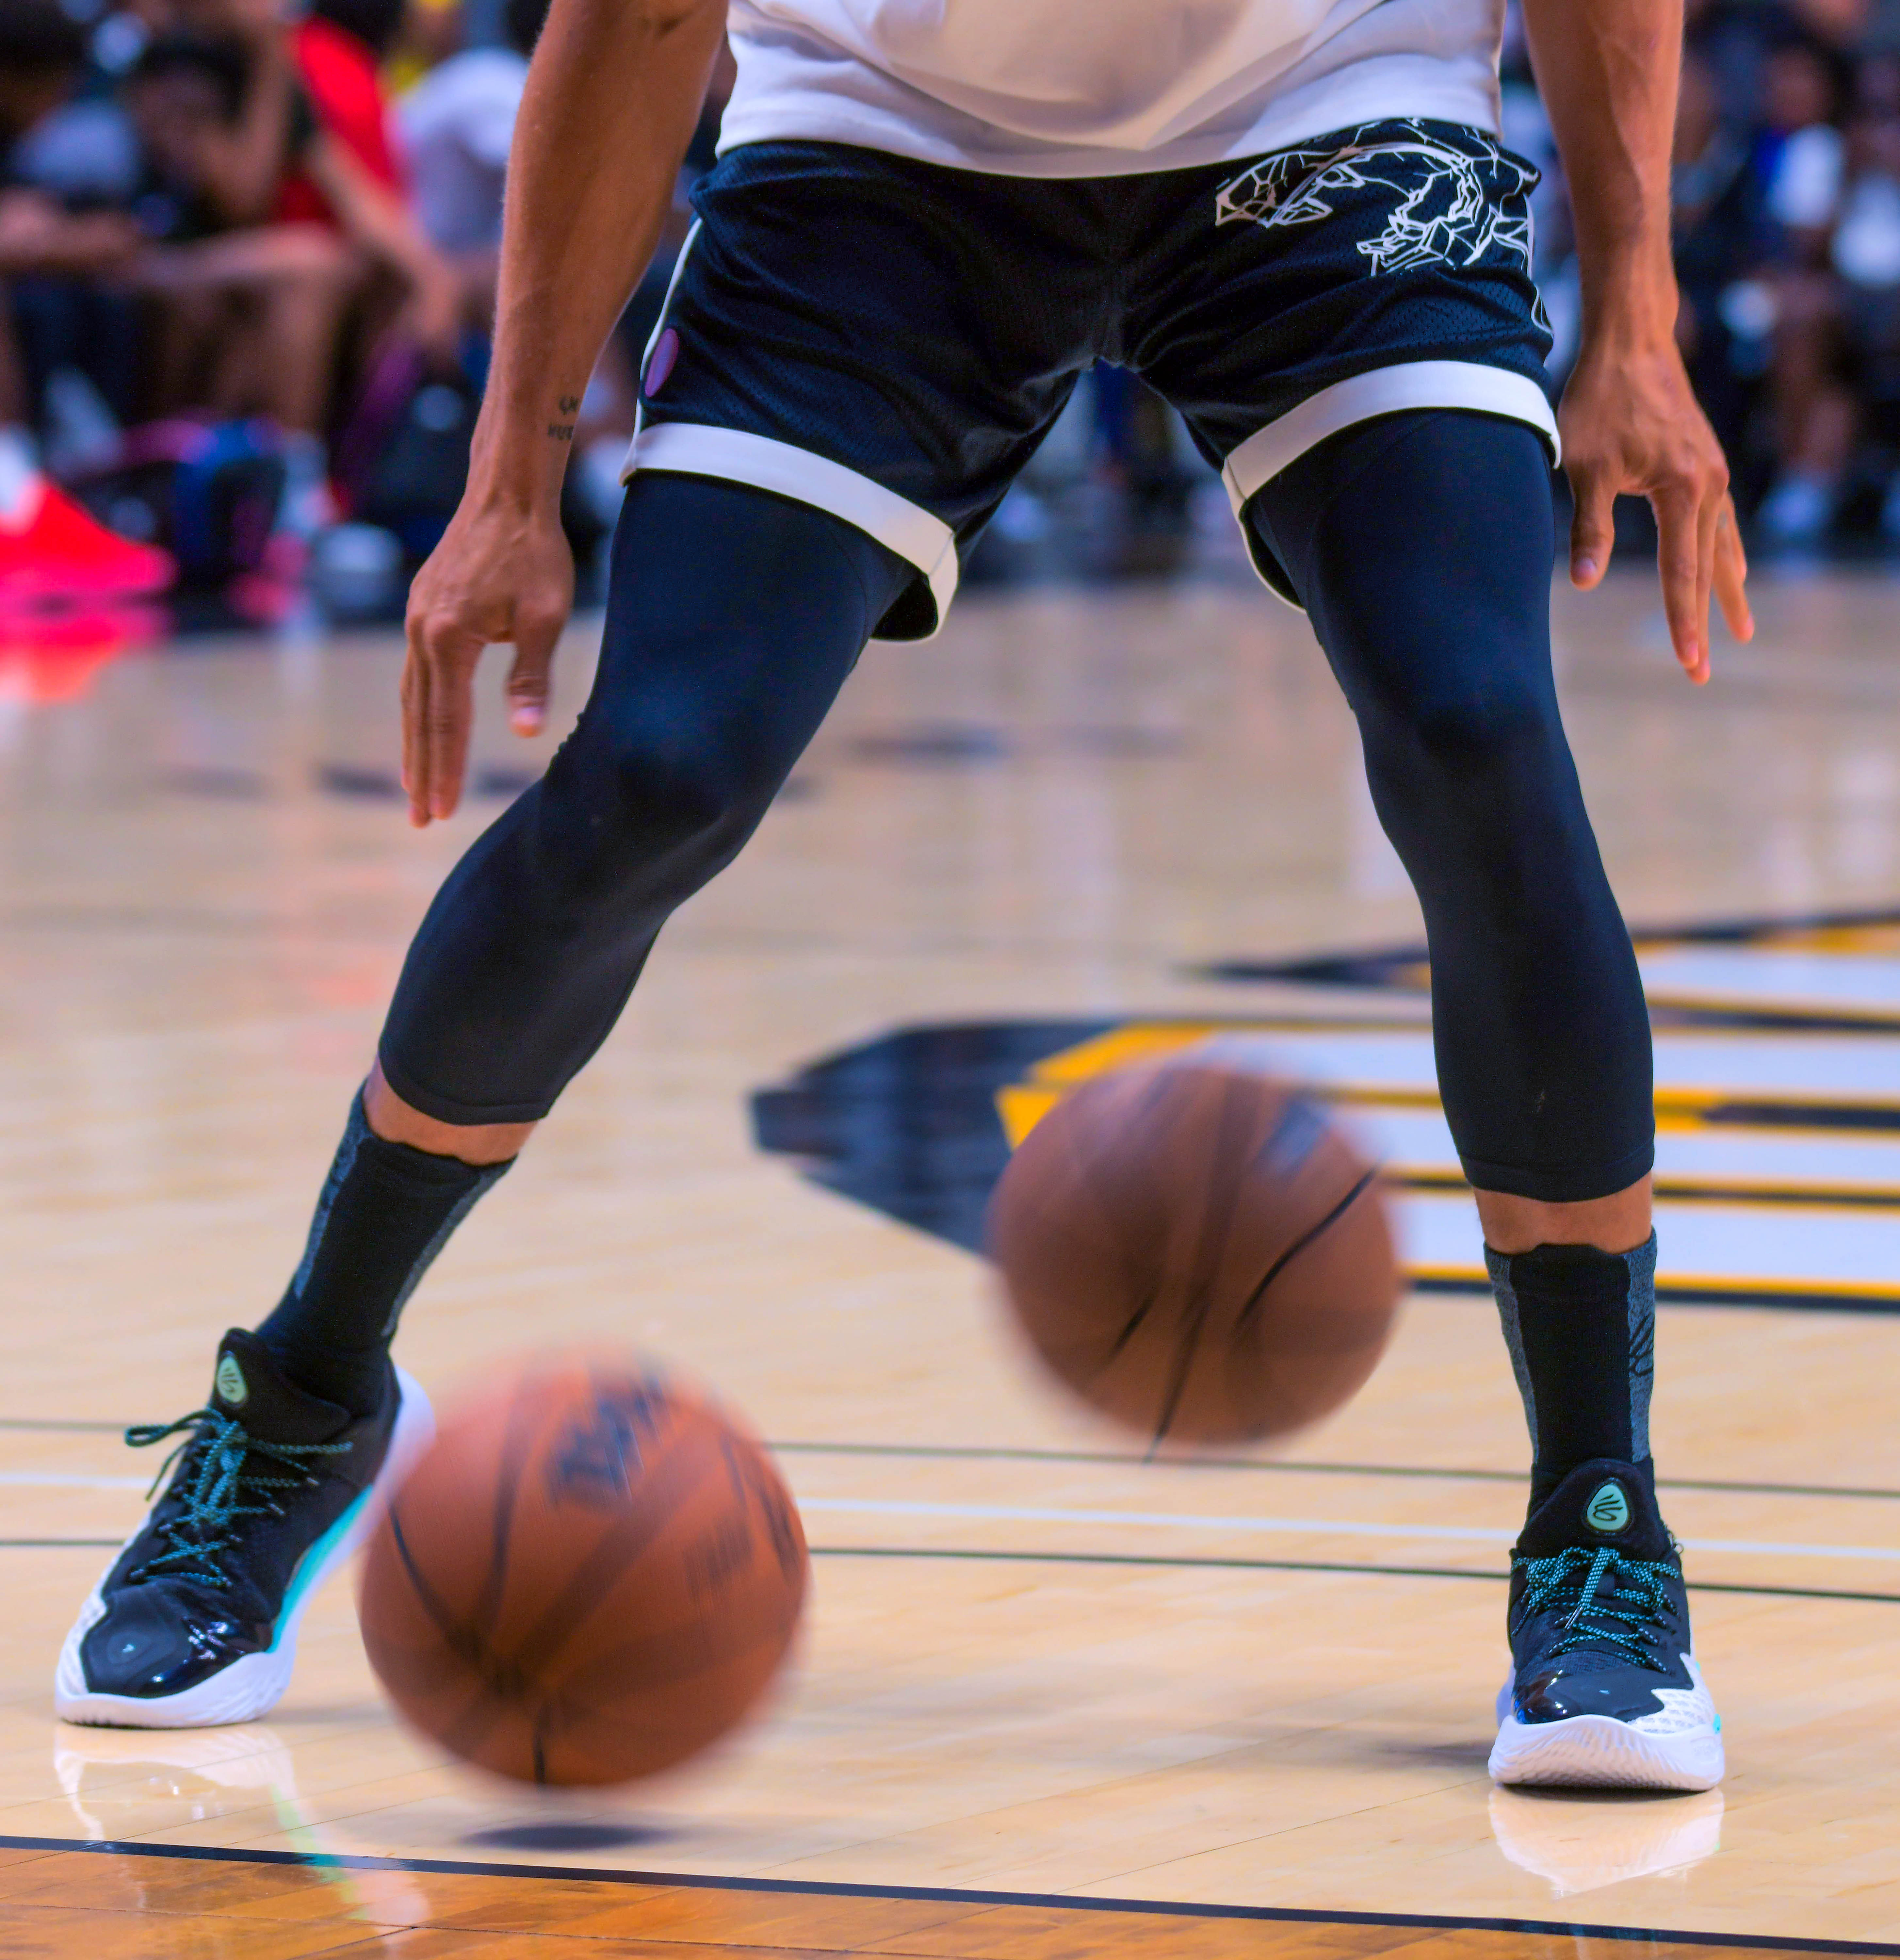 Stephen Curry Returns To UMBC For Exclusive Basketball Showcase On Aug. 17